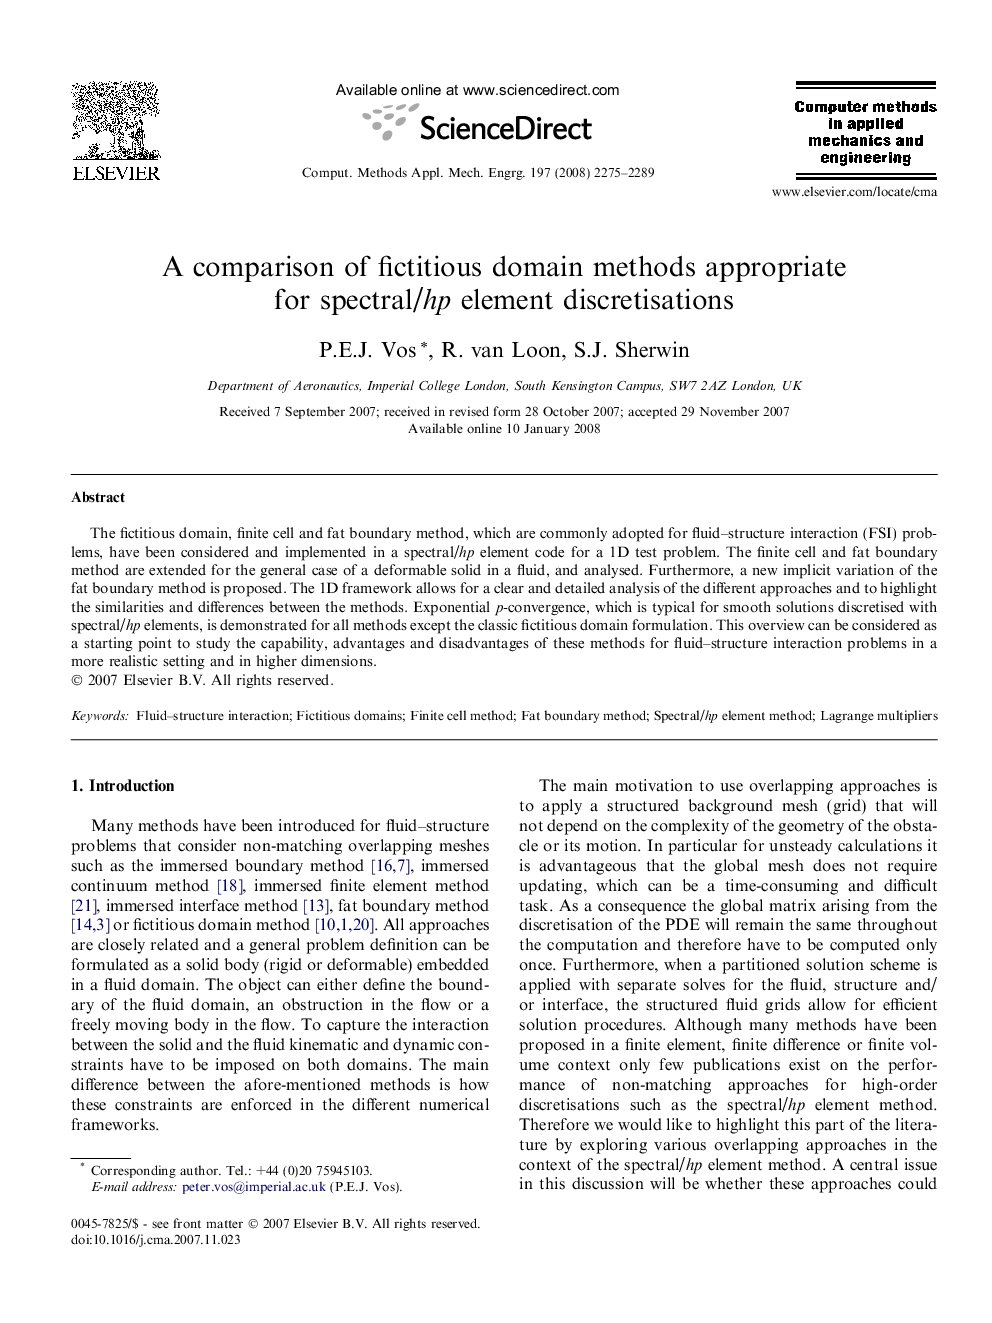 A comparison of fictitious domain methods appropriate for spectral/hp element discretisations